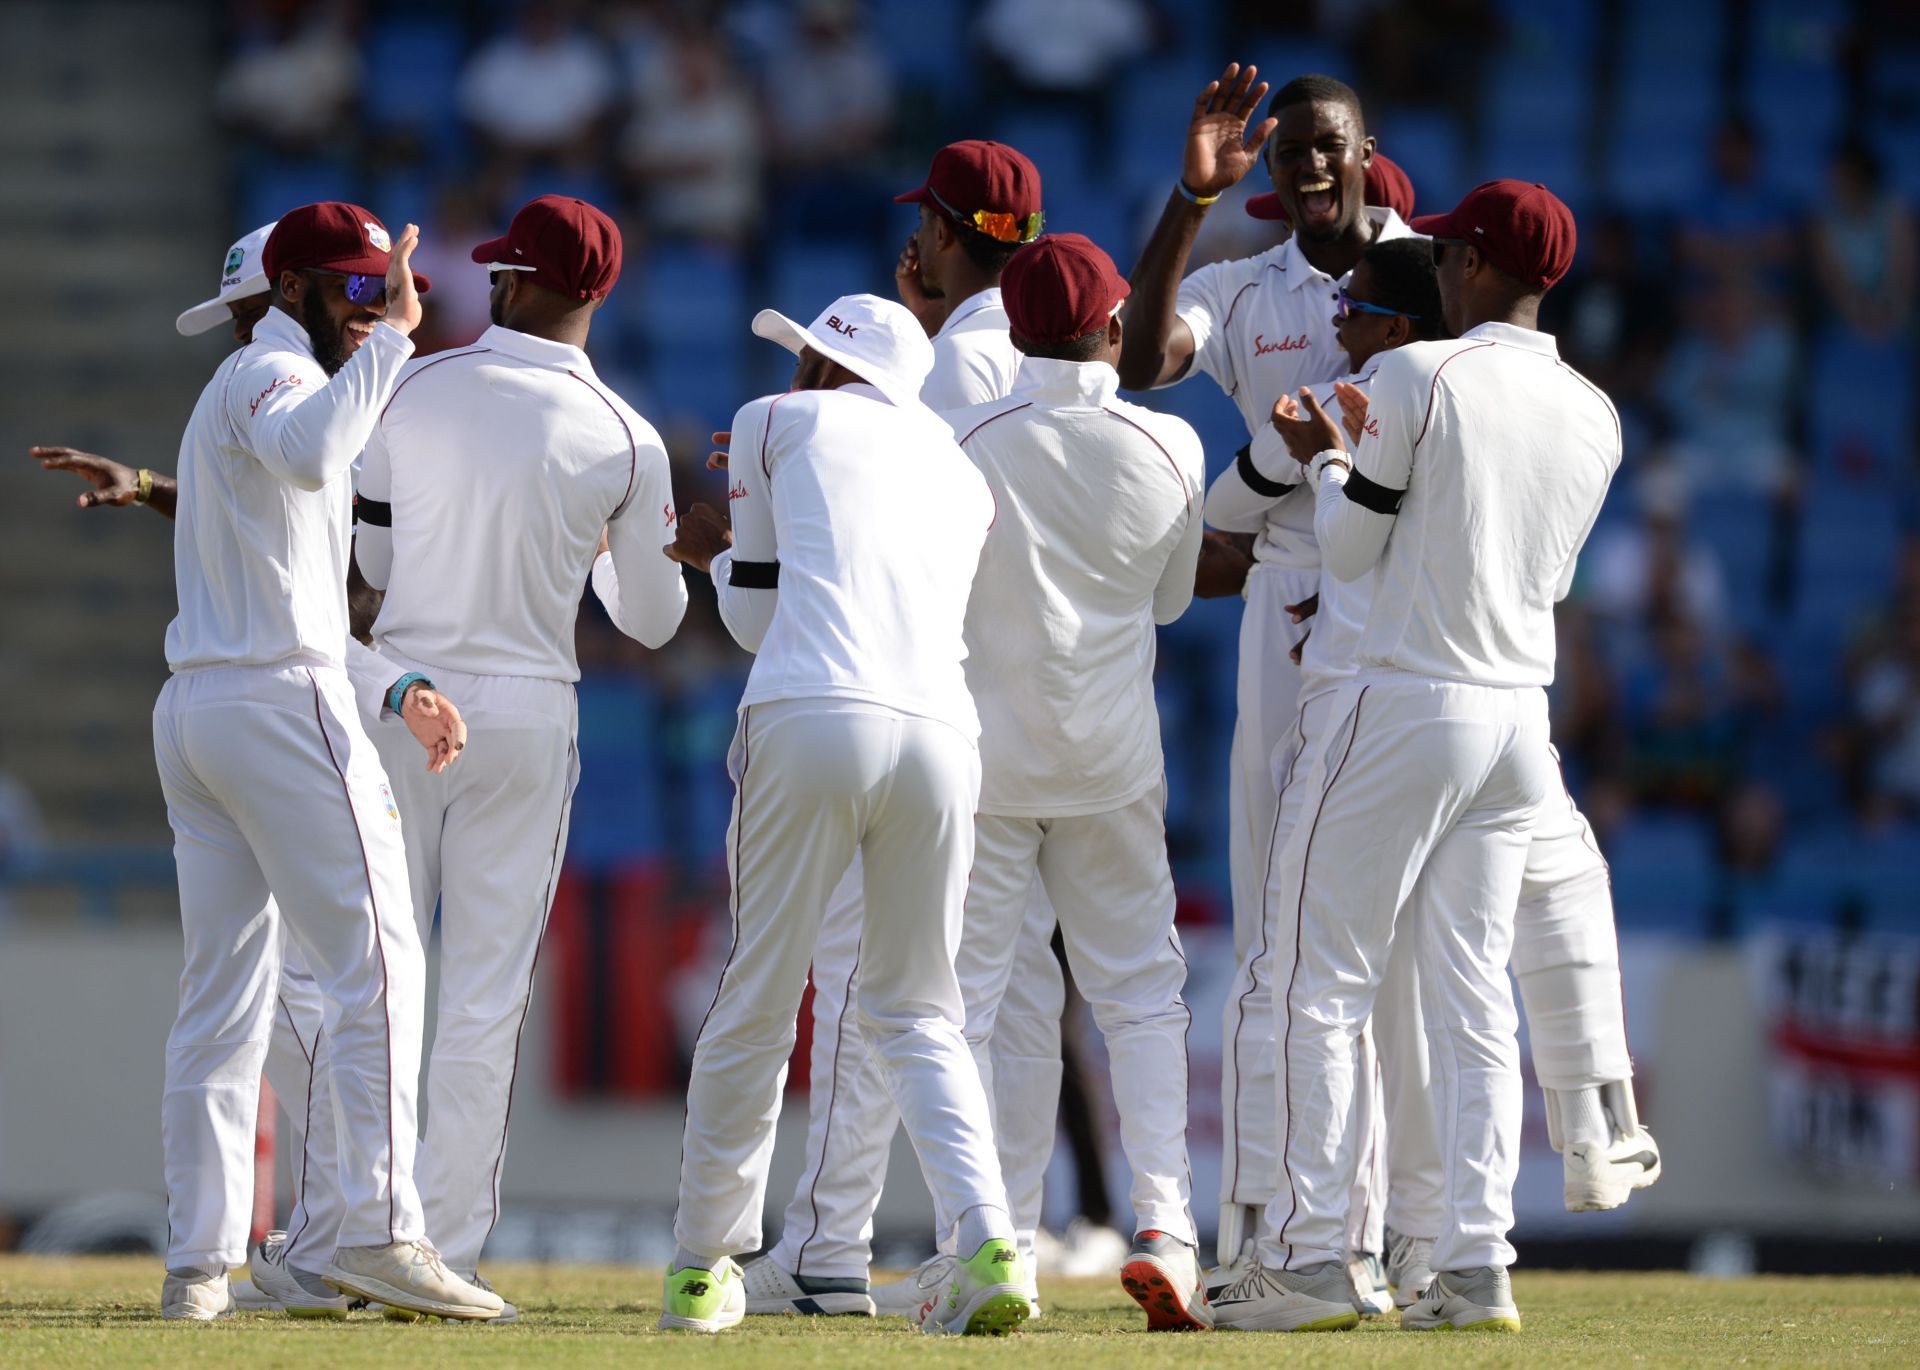 West Indies announce their squad for the First Test against Bangladesh.